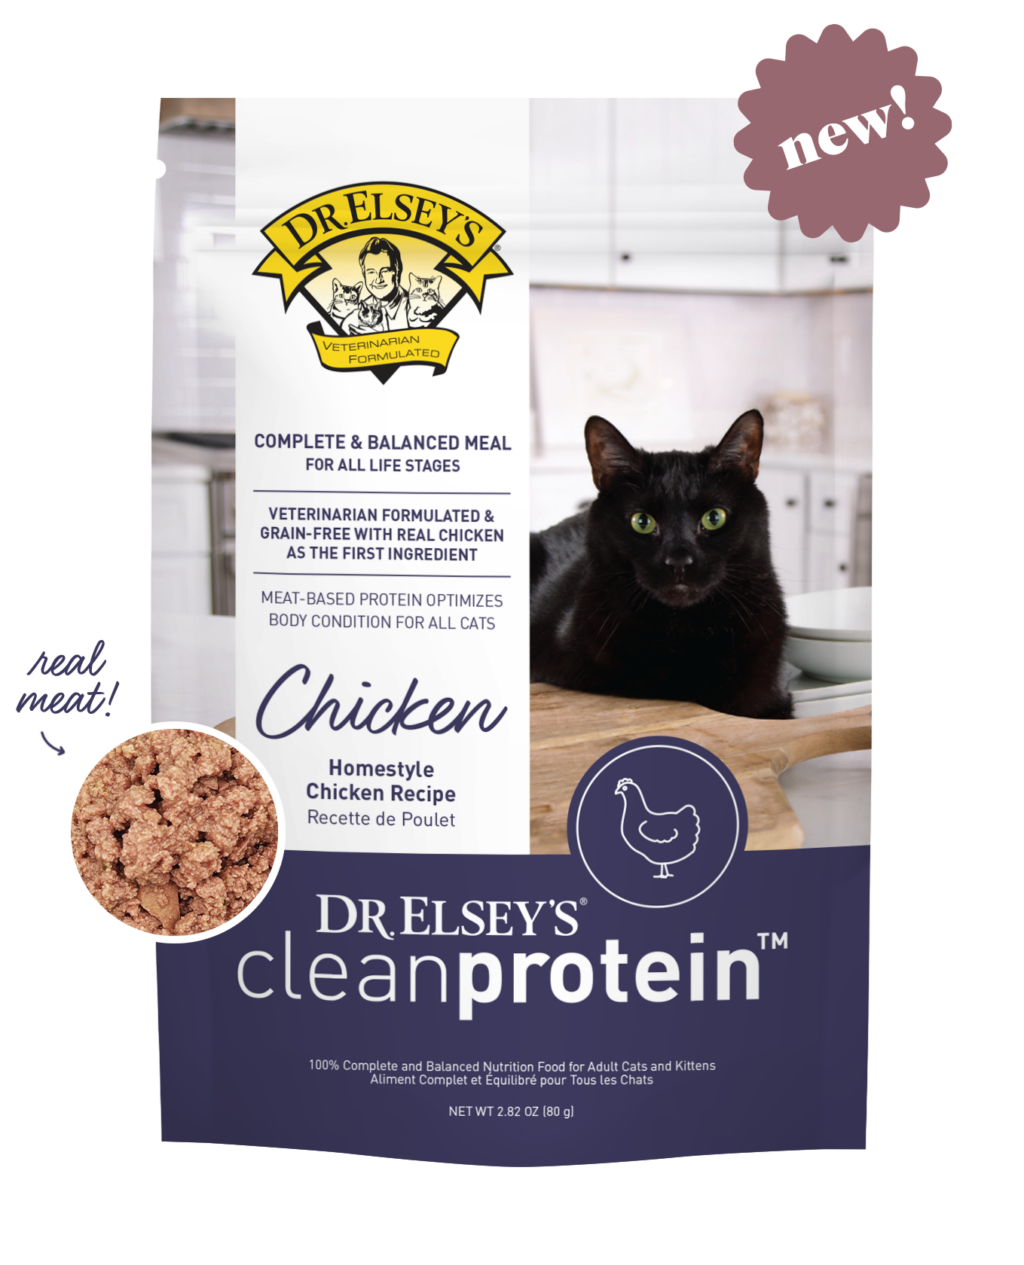 Dr. Elsey’s cleanprotein™ Homestyle Chicken Recipe Pouch